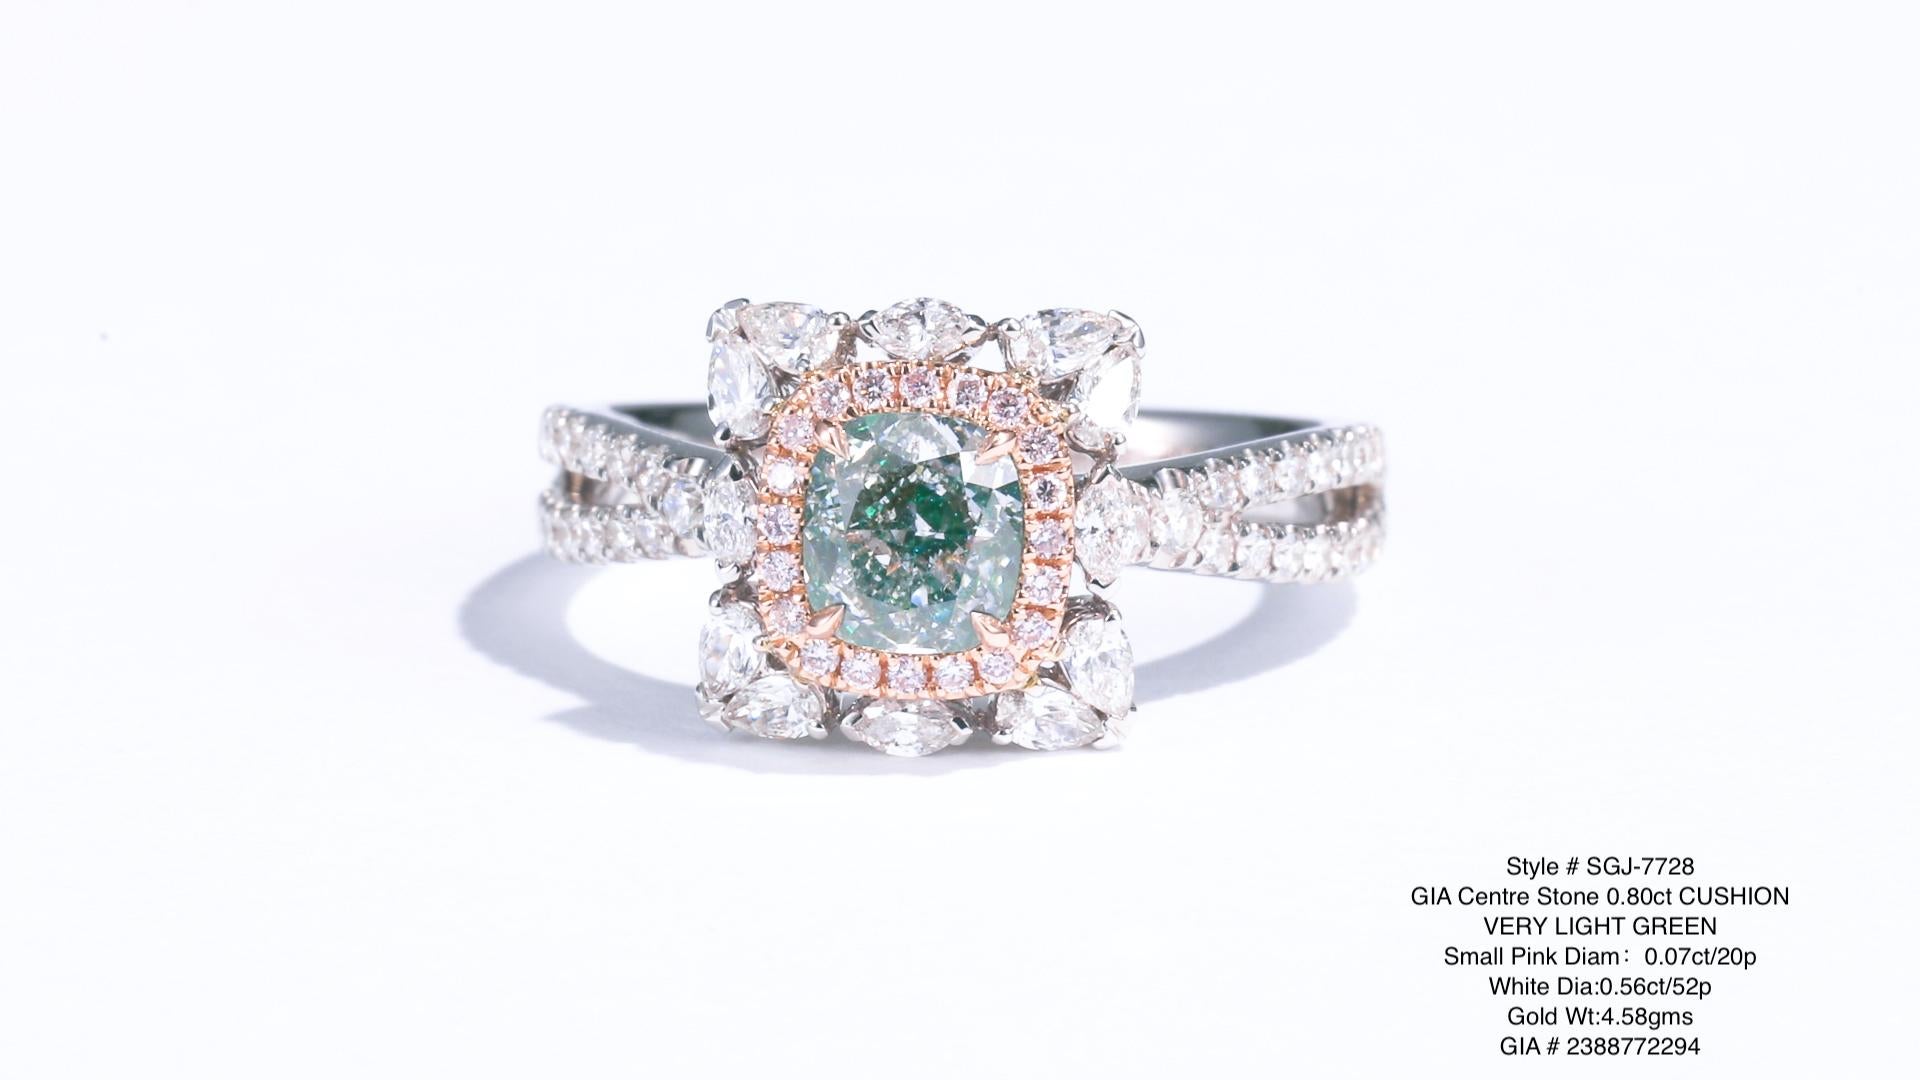 Introducing a captivating jewelry piece featuring a remarkable 0.80ct natural very light green cushion-shaped diamond GIA certified. 

This exquisite diamond is set in a stunning design that can be worn as both a pendant and a ring, adding